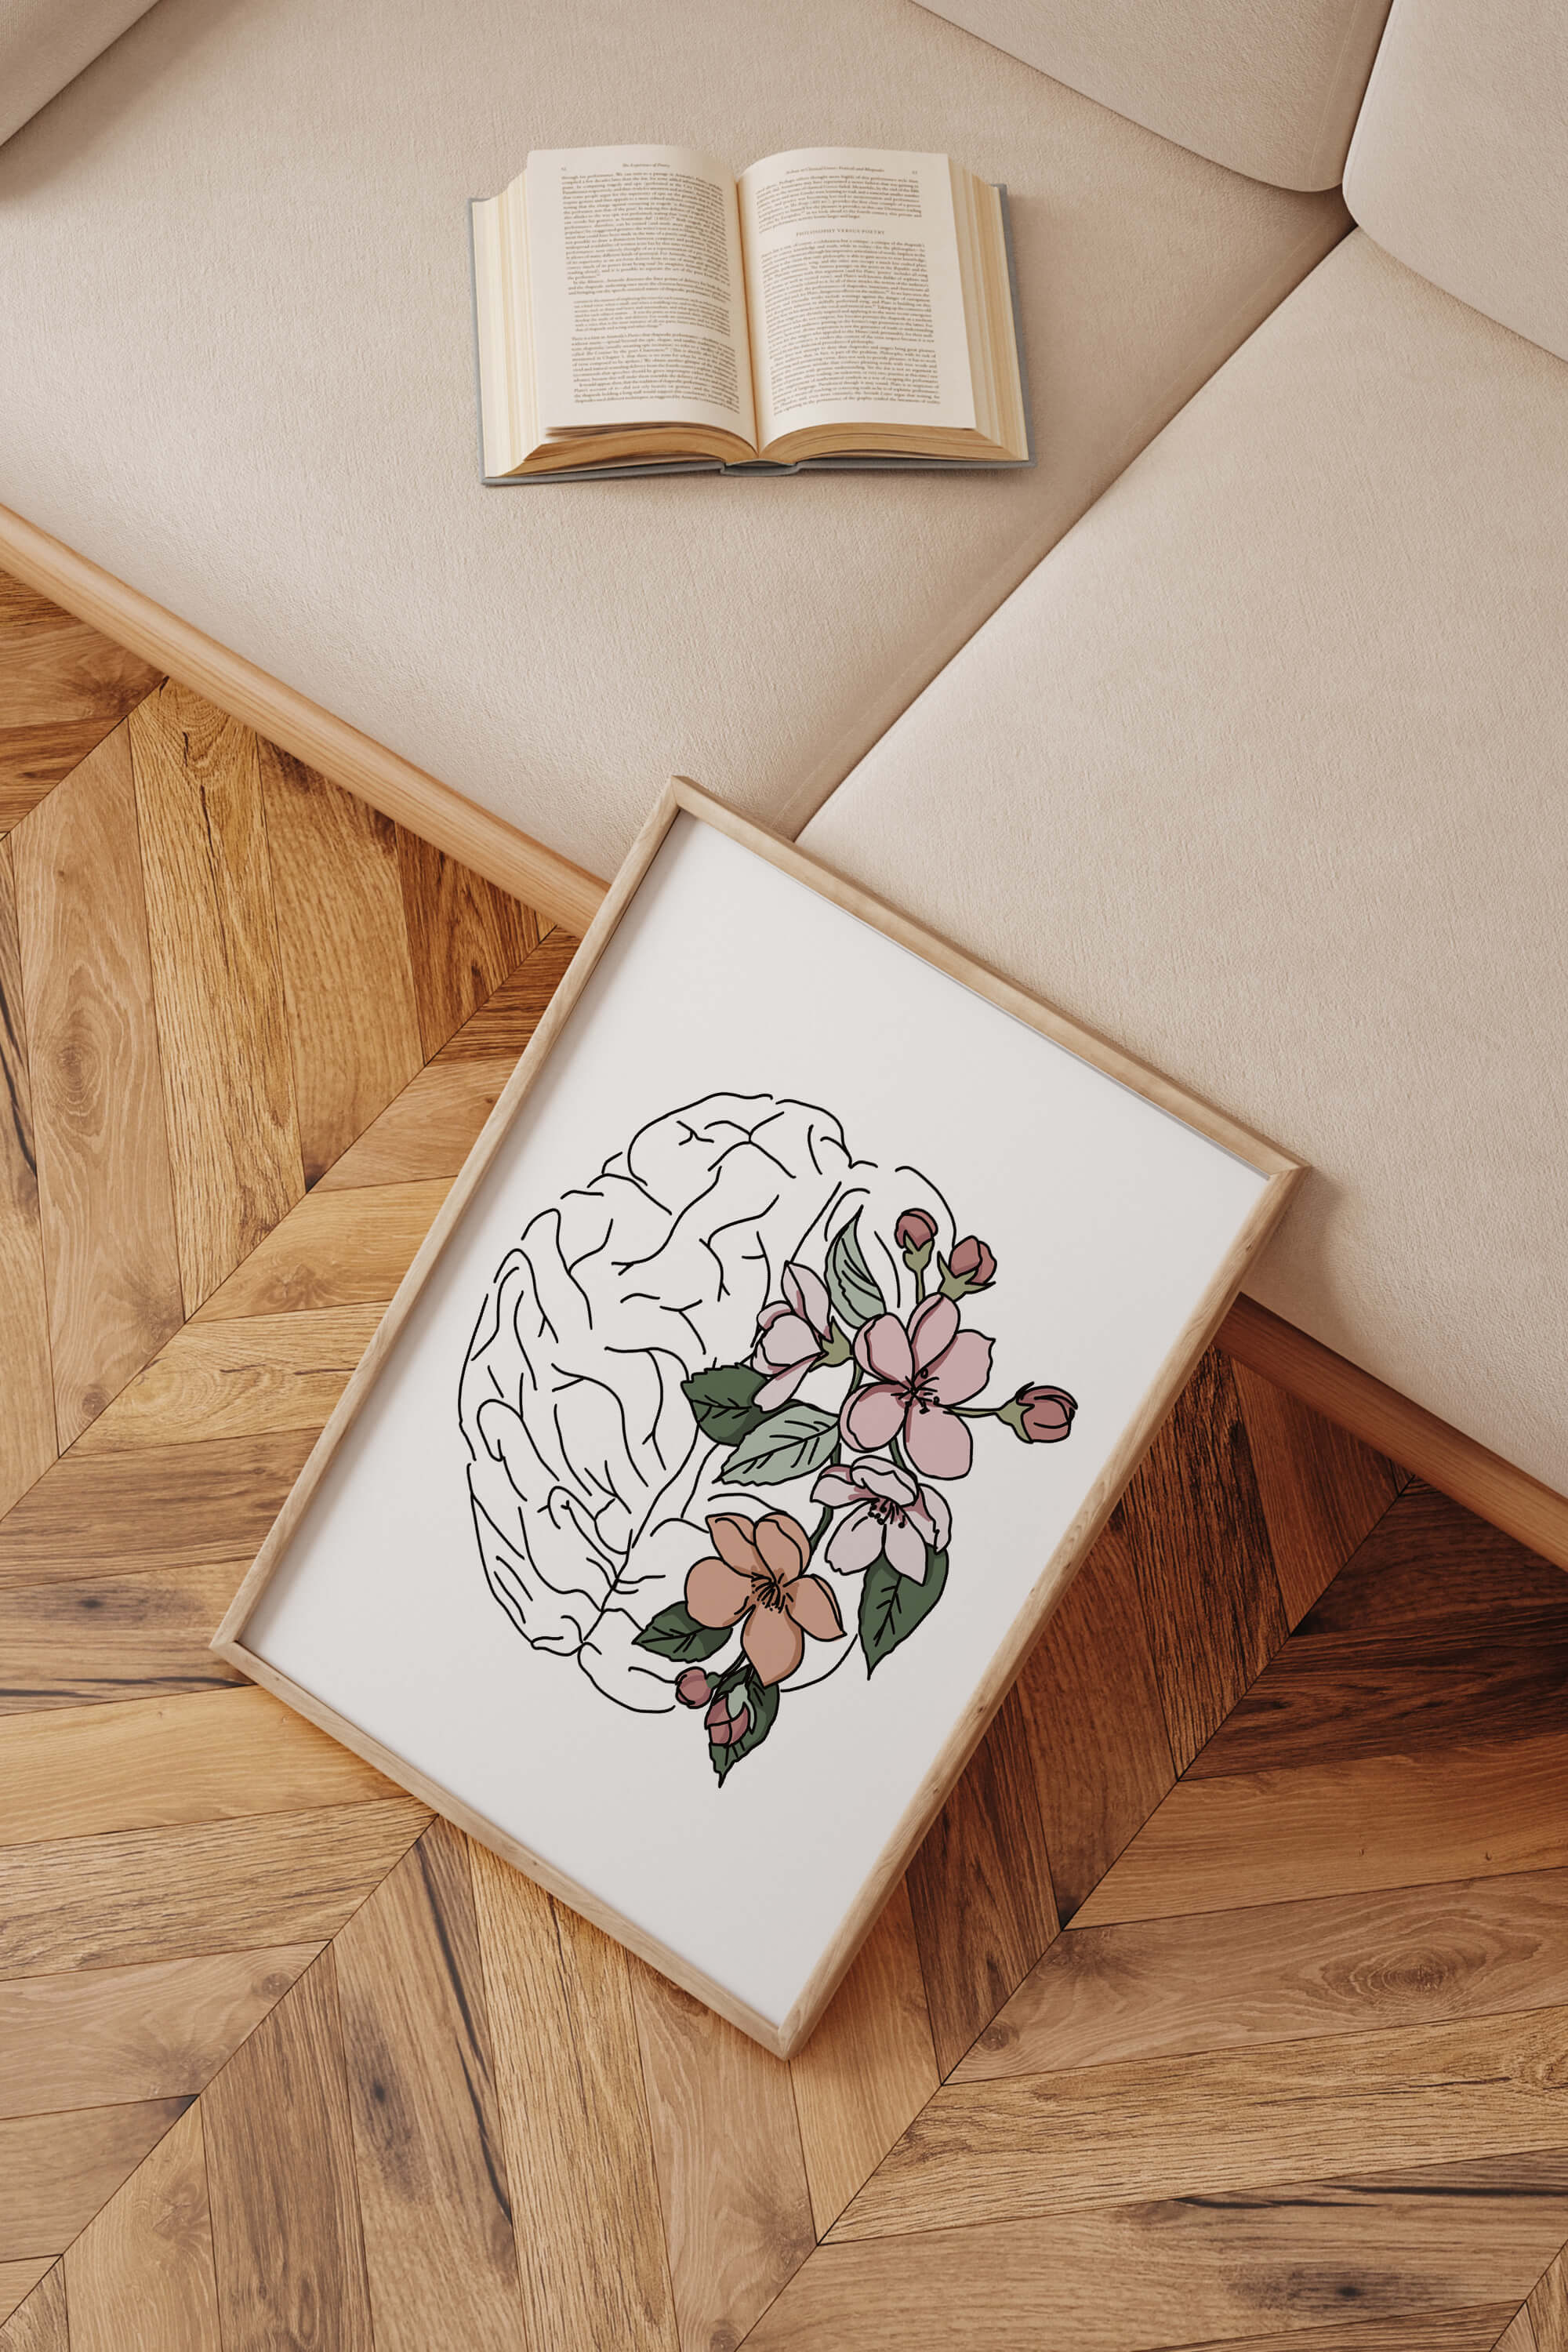 Bright and Artistic Brain Anatomy Poster, merging neuroscience with art, great for nurse wall art.